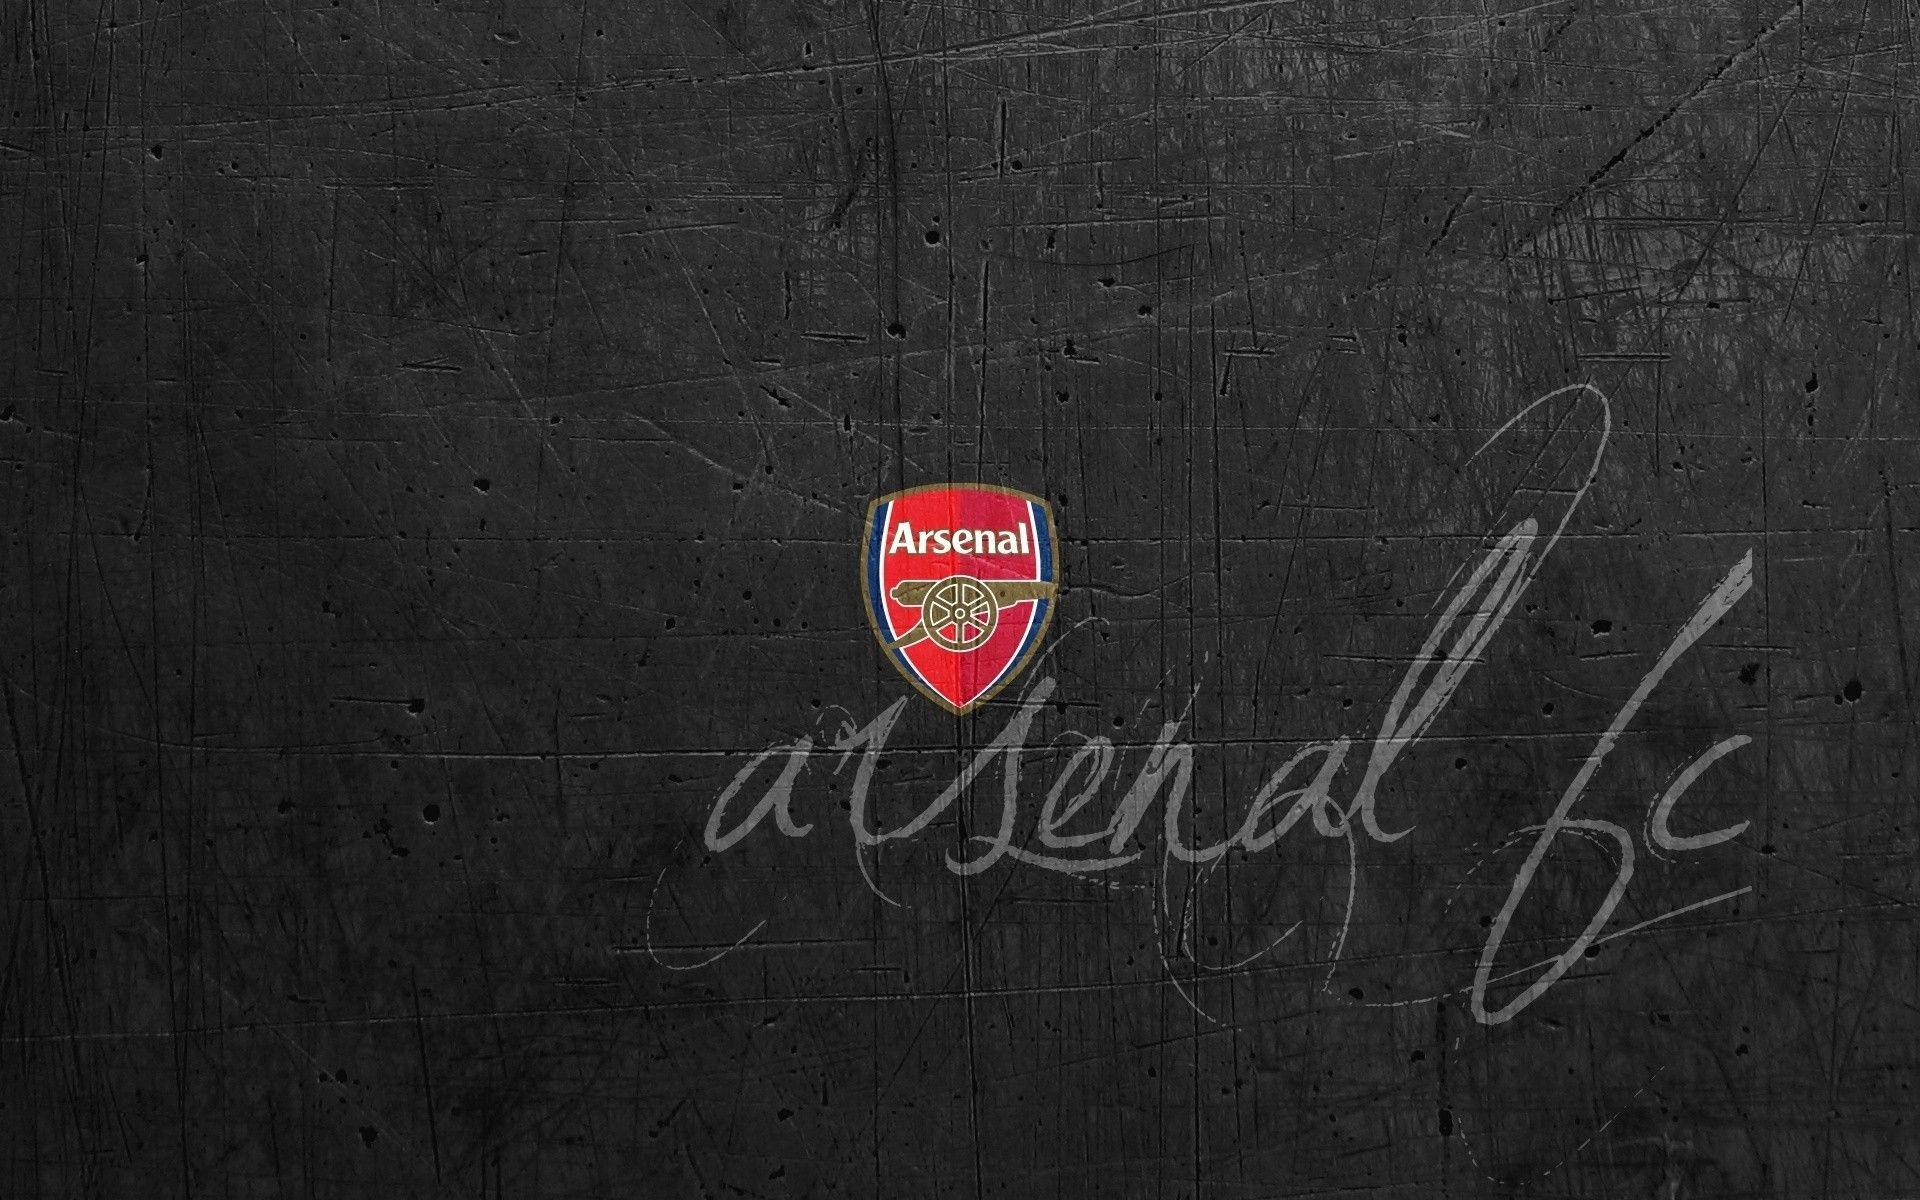 Arsenal HD Wallpaper for Desktop, iPhone, iPad, and Android